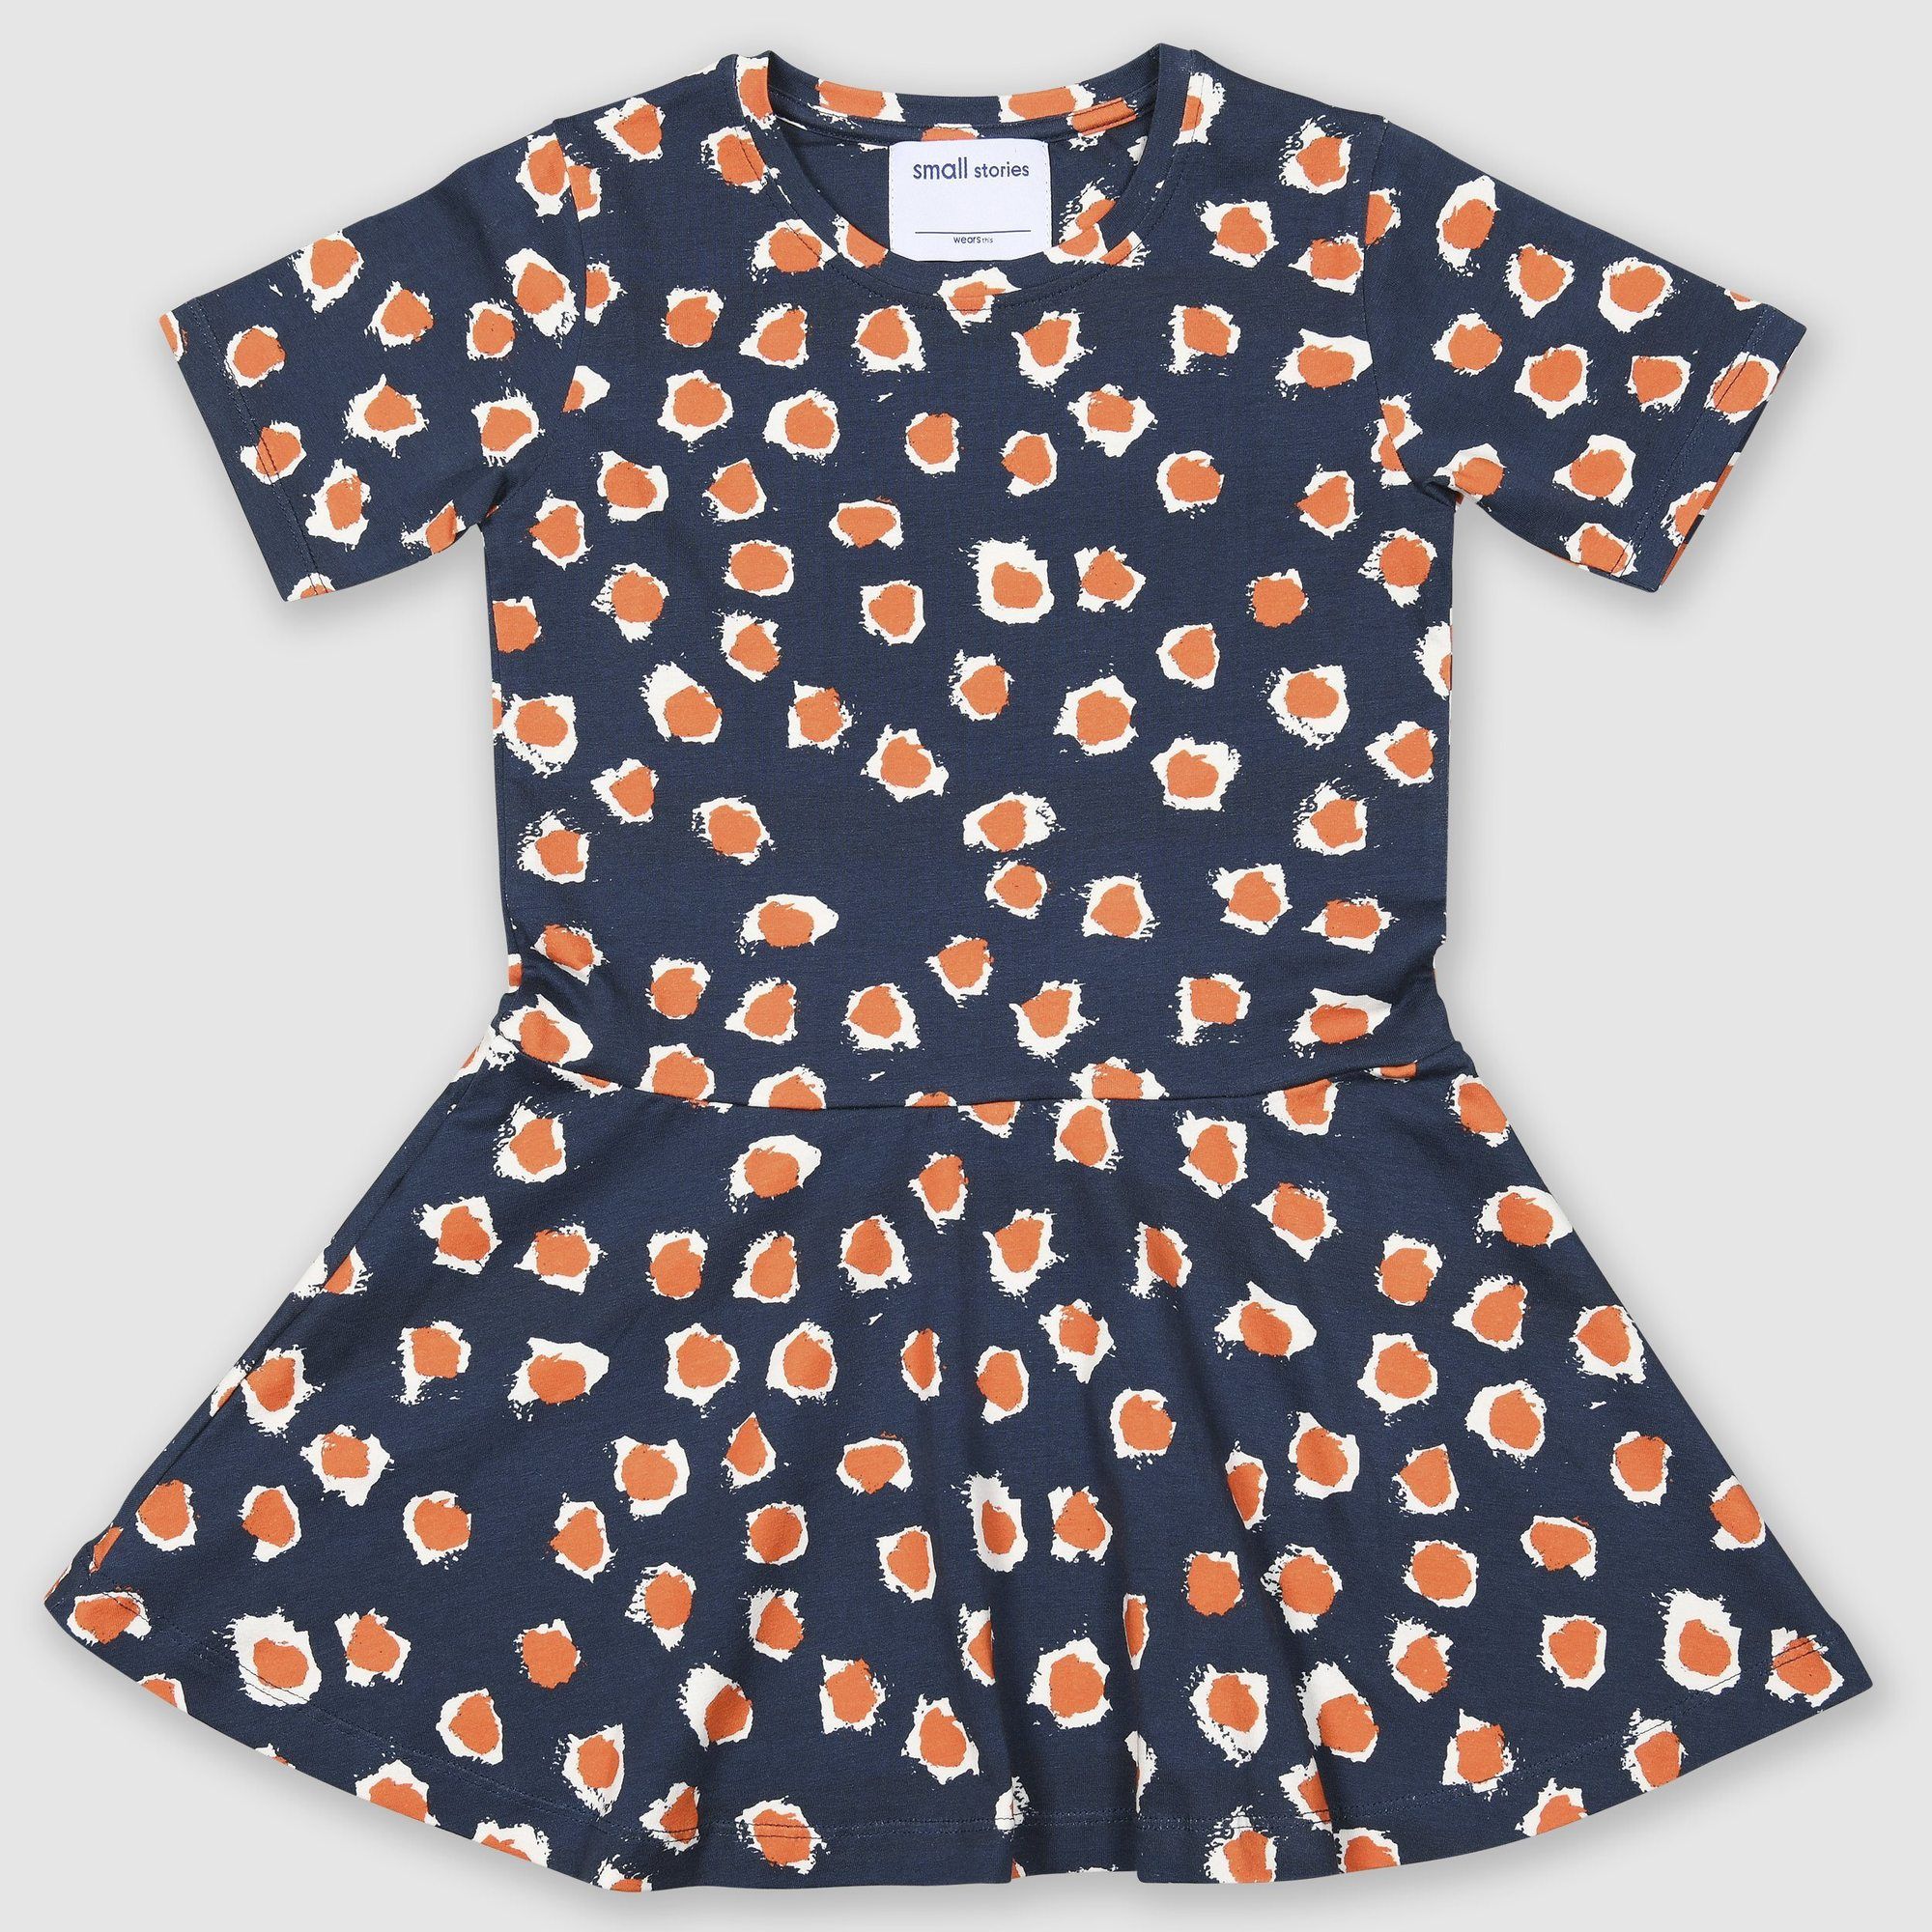 Short sleeve jersey dress with drop waist in our bespoke painted dot print in blue with orange and white dots. Made from super soft stretchy cotton.